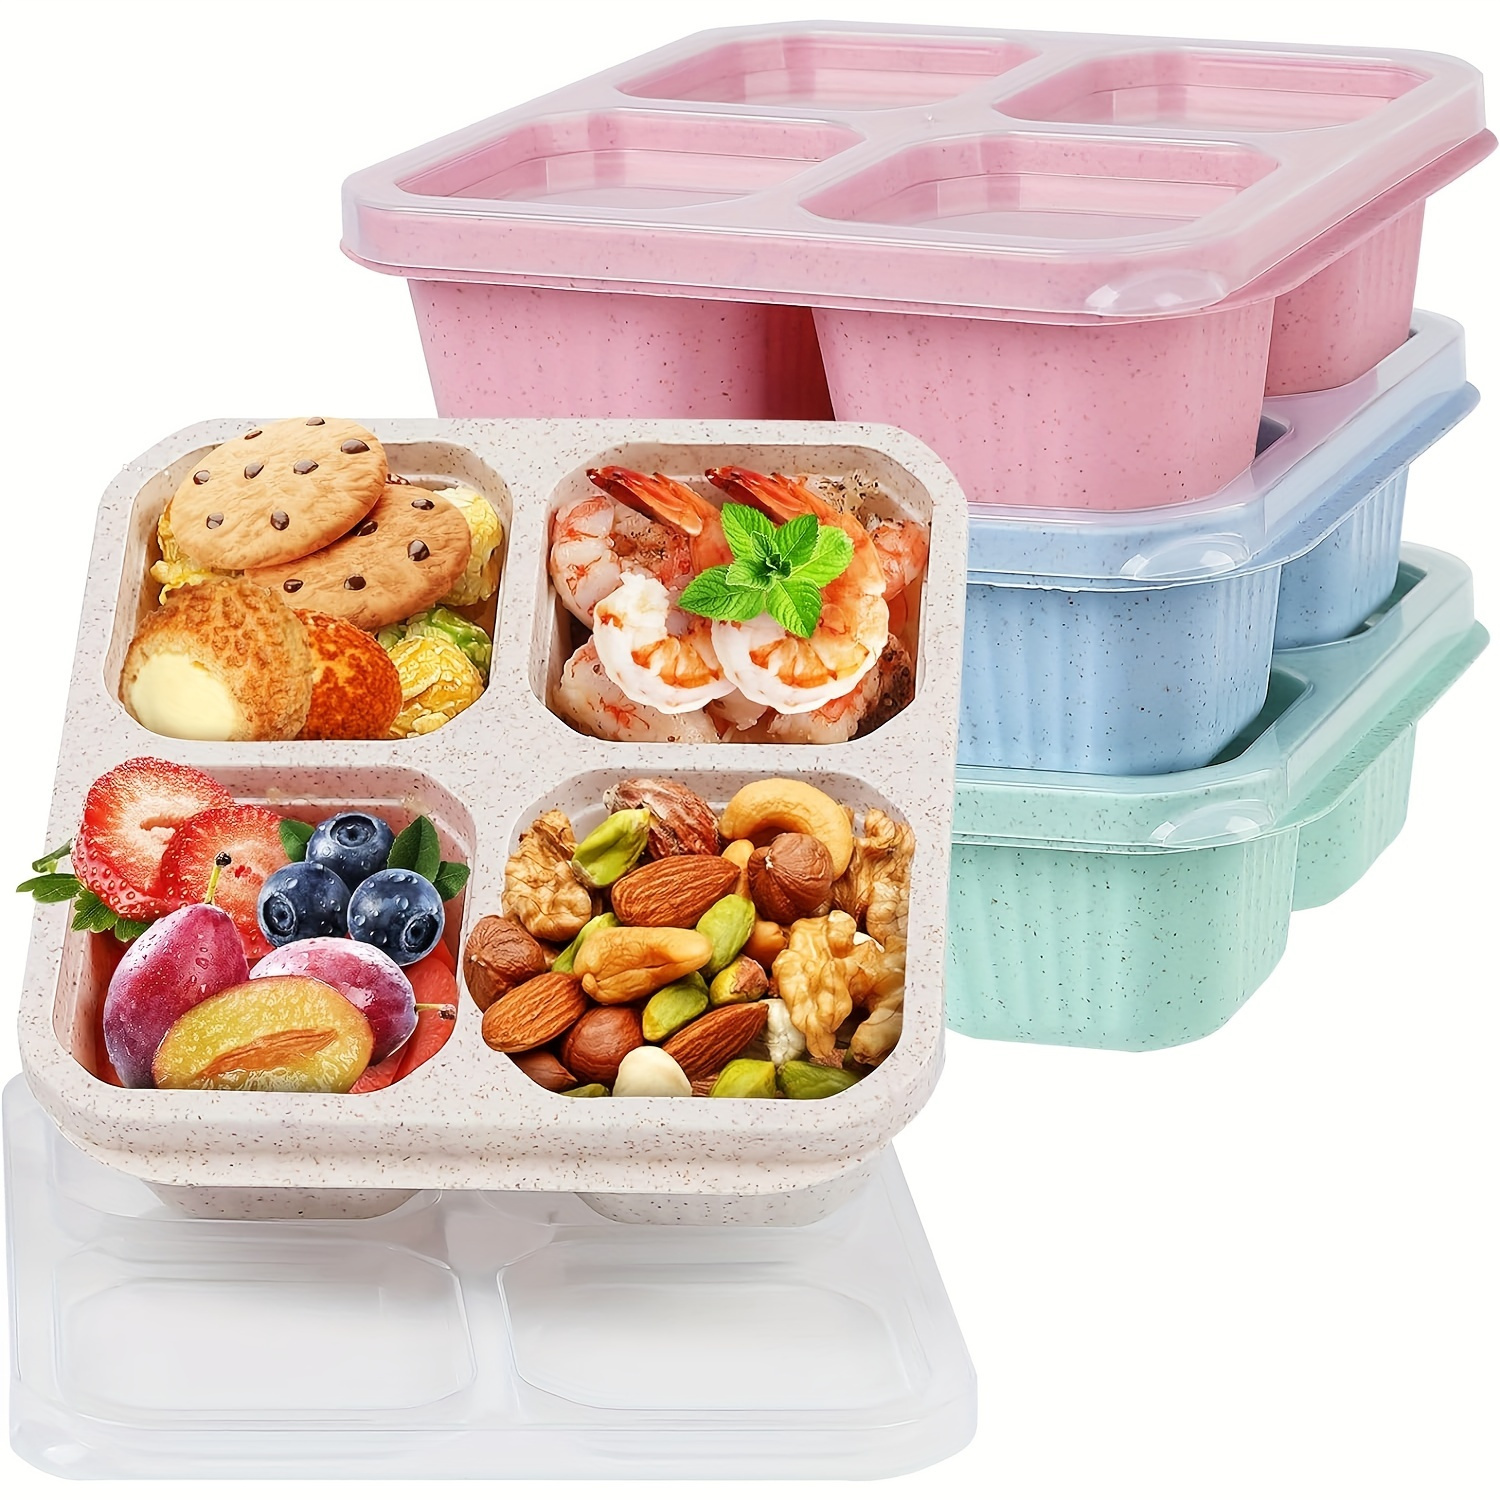 

4pcs Snack Containers, 4 Compartments Bento Snack Box, Reusable Meal Prep Lunch Containers, Divided Food Storage Containers For Work Travel